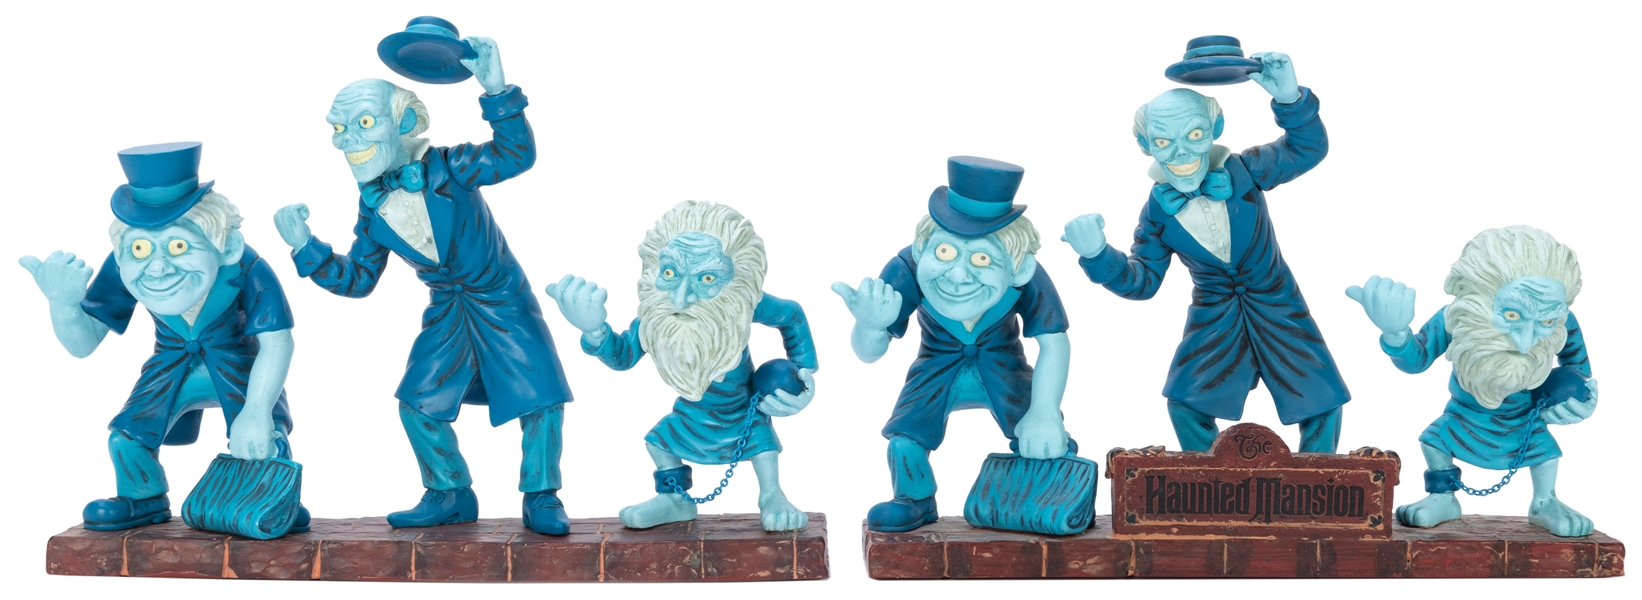  The Haunted Mansion Hitchhiking Ghosts Bobblehead Figurines...